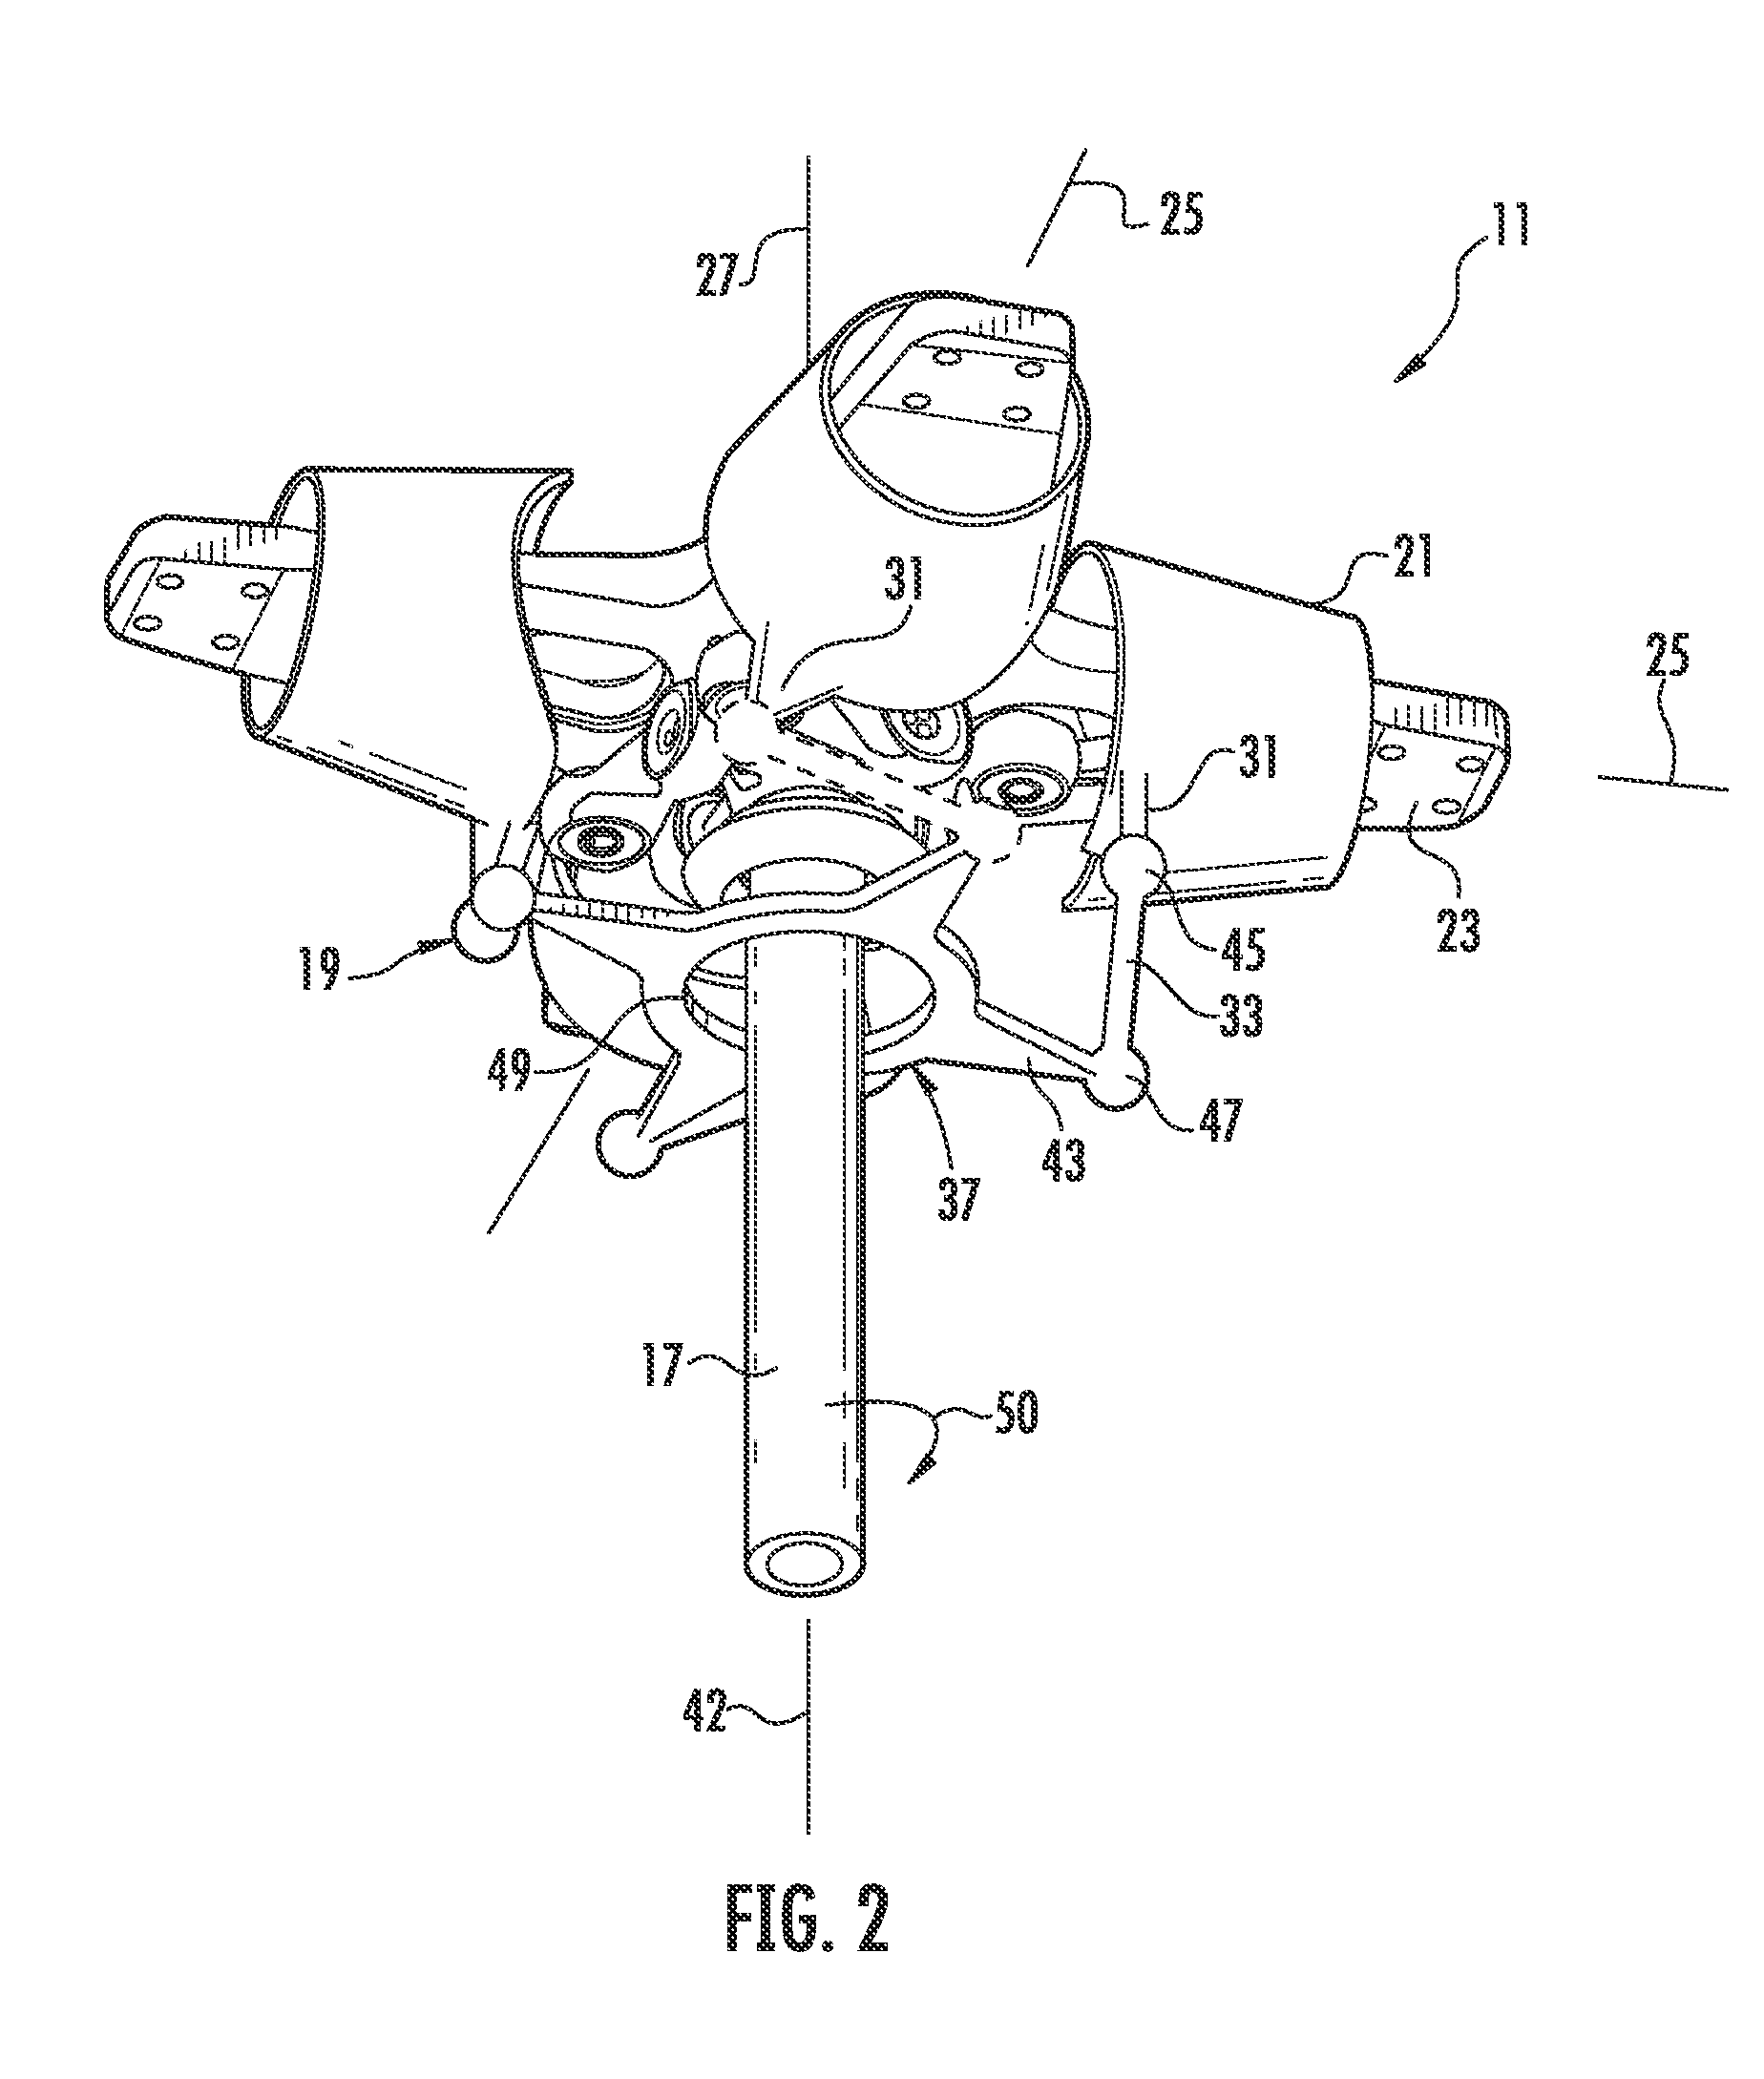 Improved Rotor-Blade Control System and Method